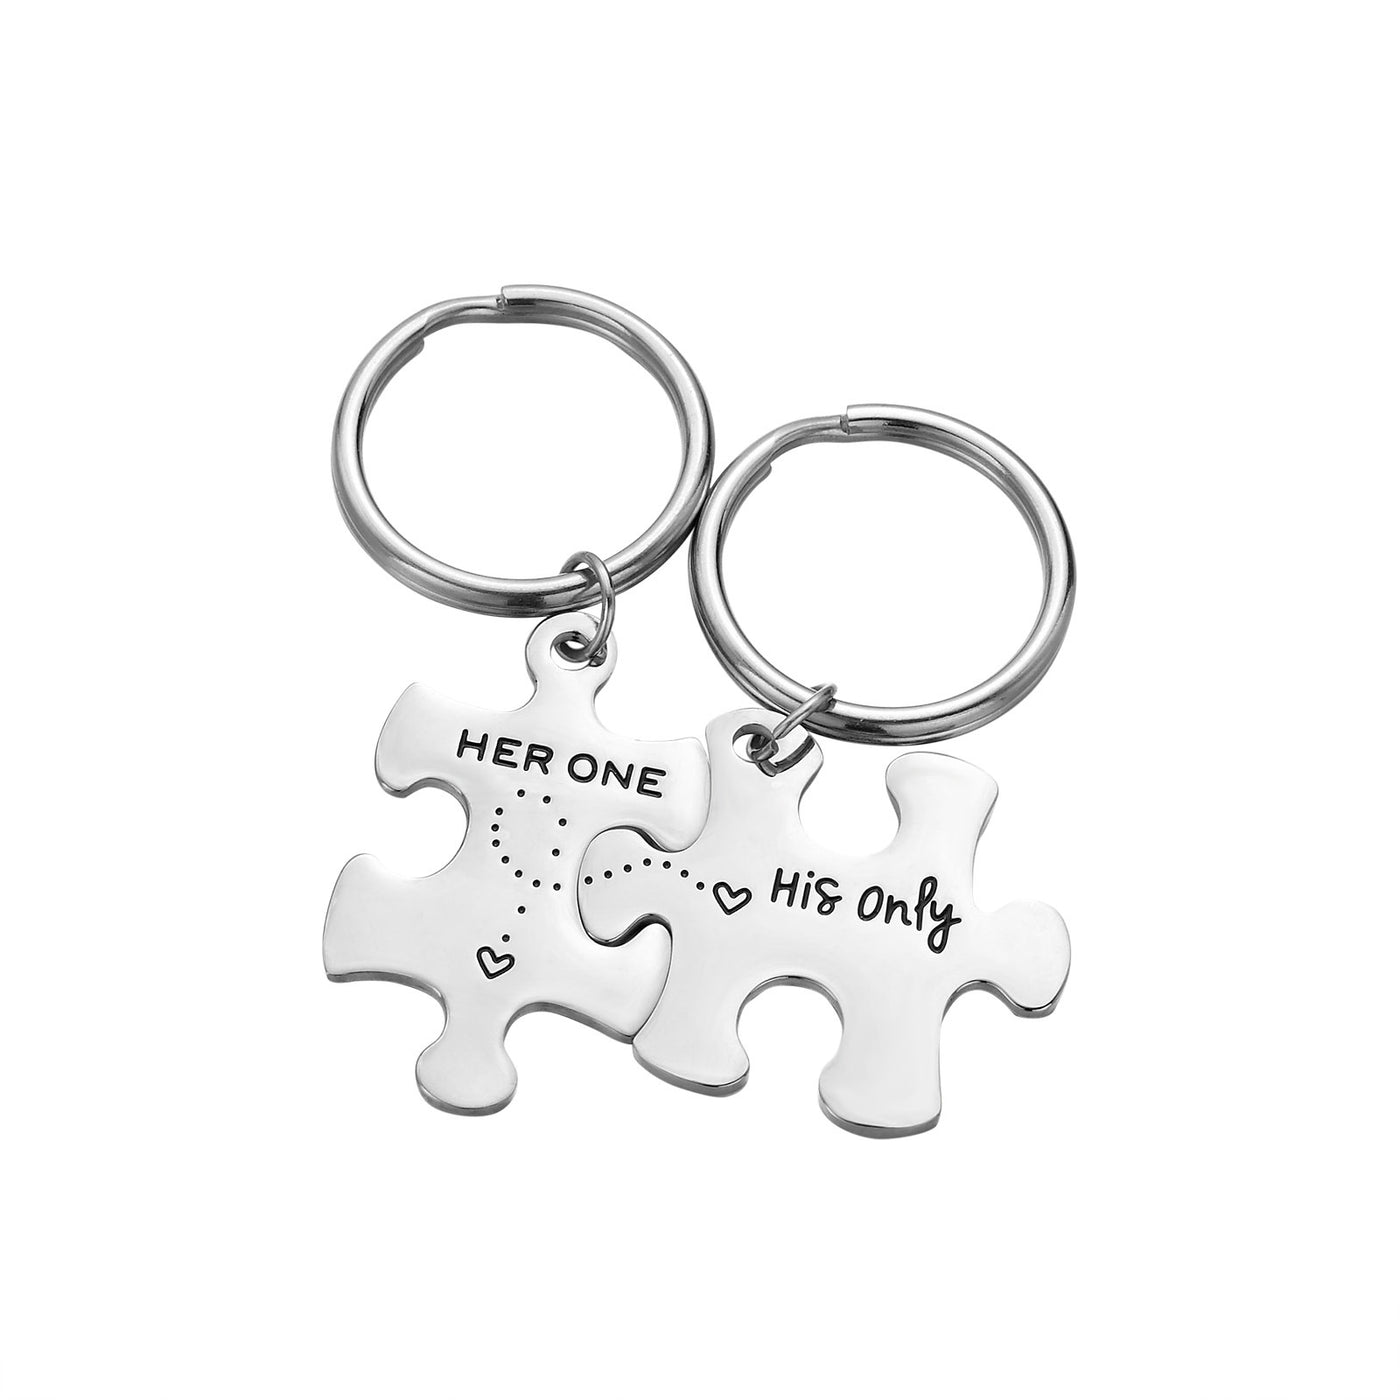 Her One & His Only Keychain for Lovers